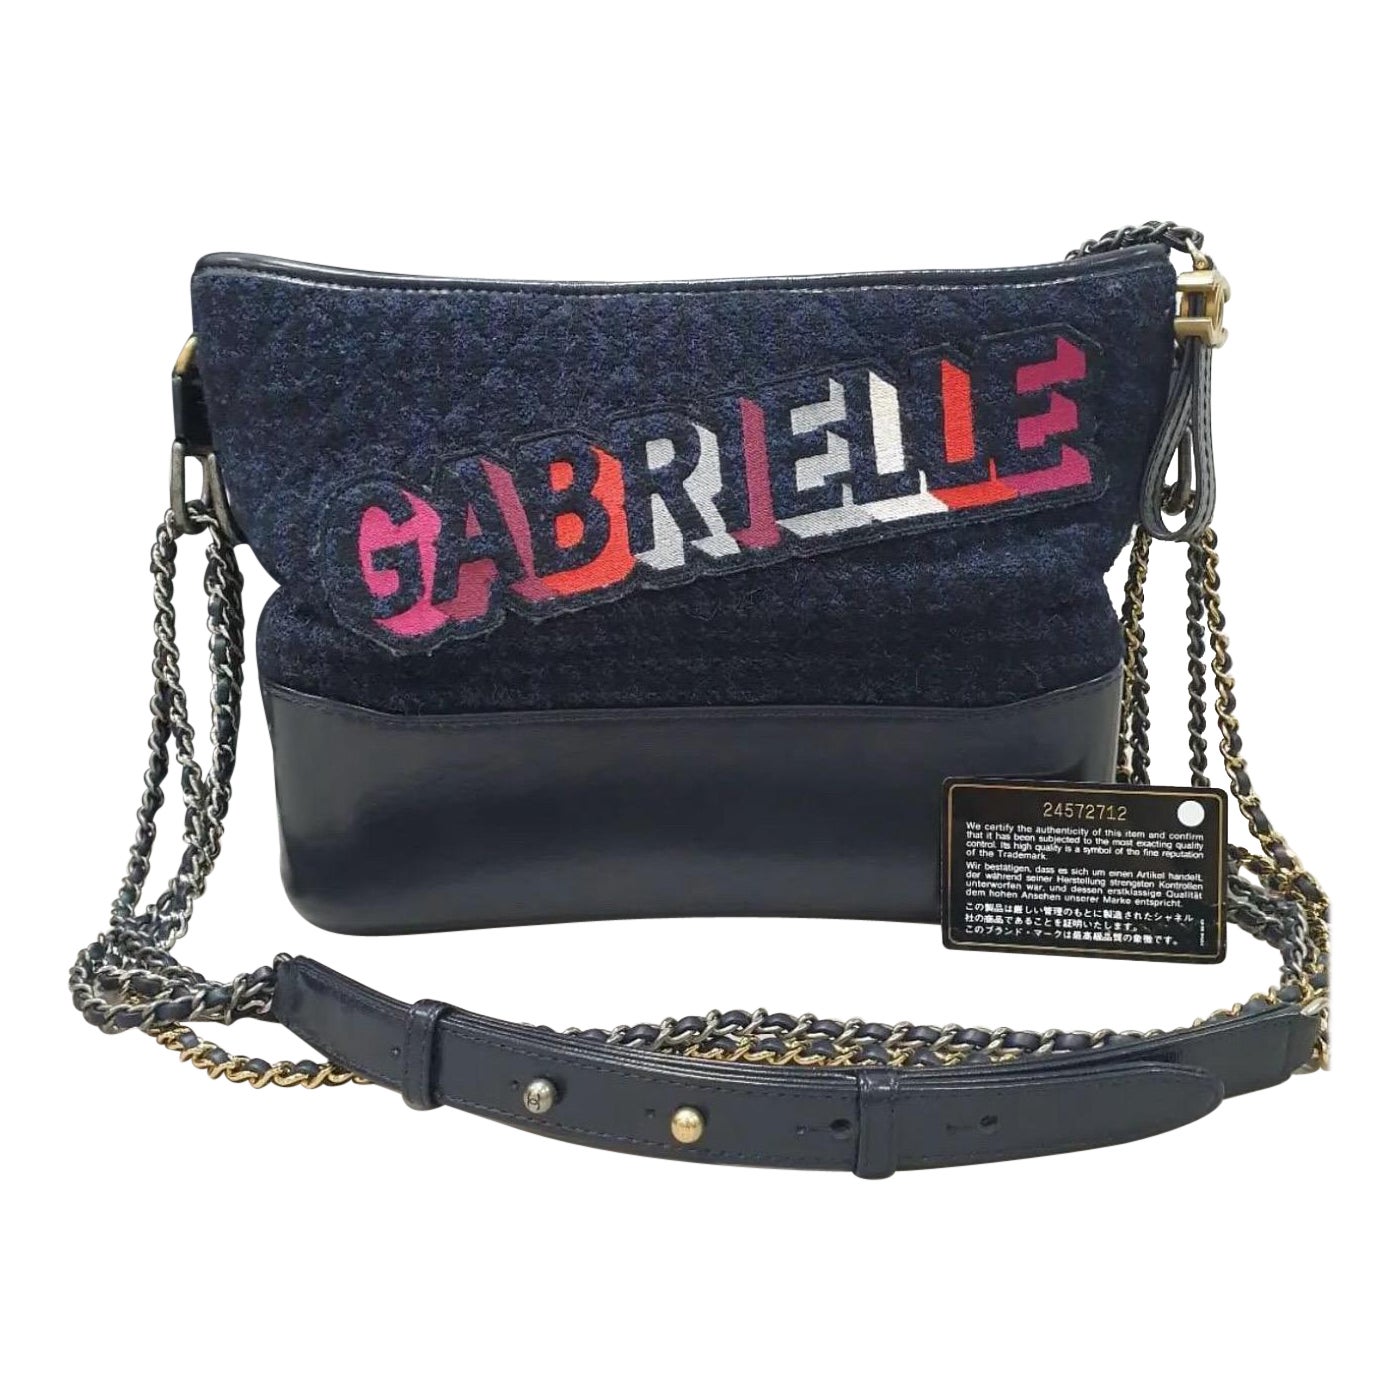 Chanel Navy Tweed Gabrielle Bag For Sale